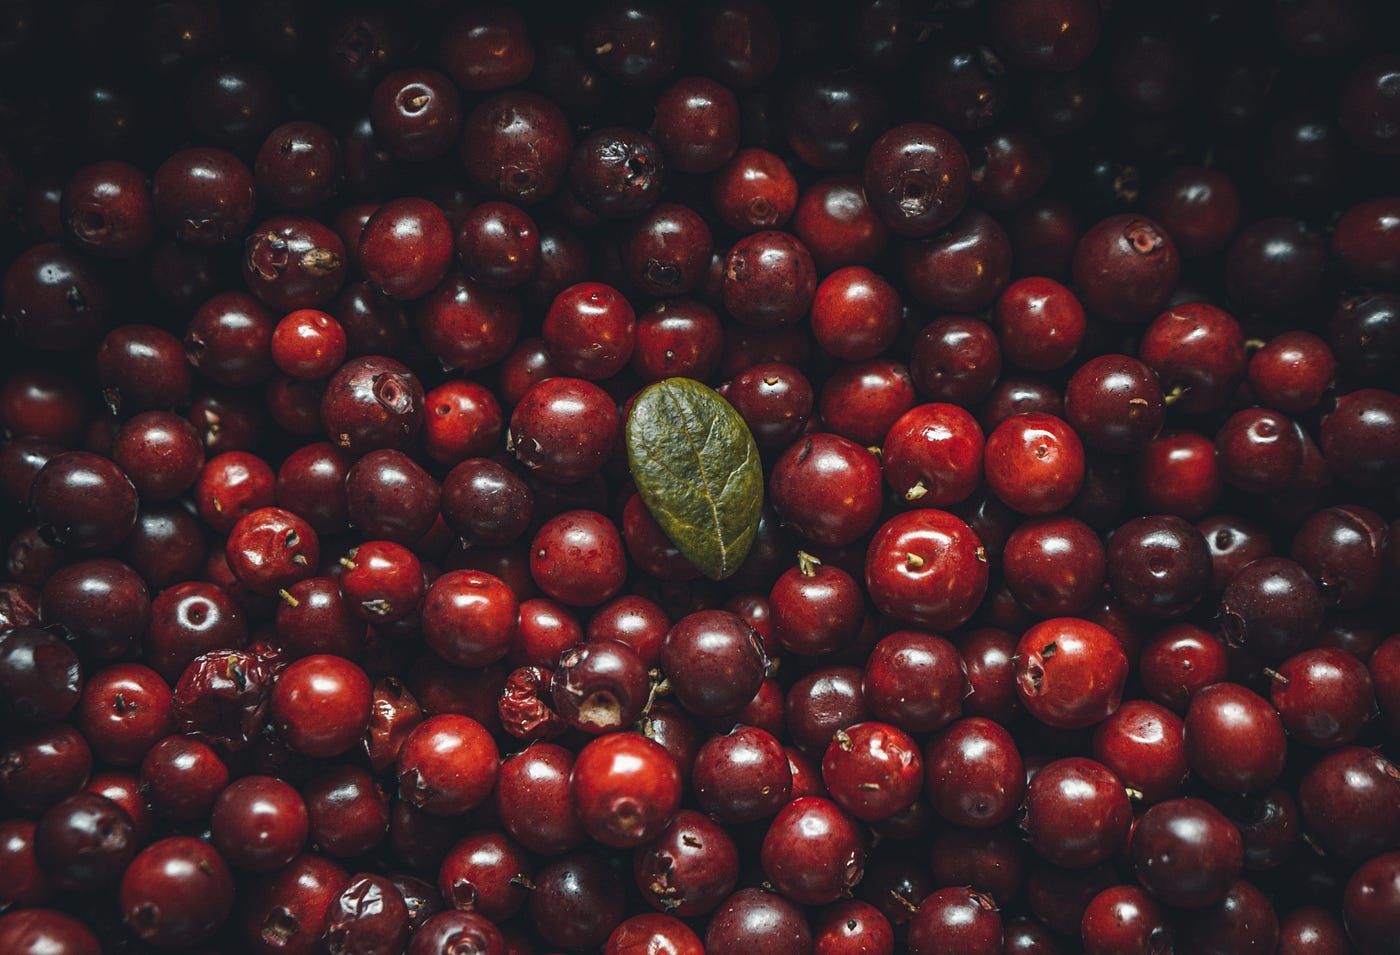 A field of blood red cranberries, with a single vertically-oriented green leaf in the center of the image.